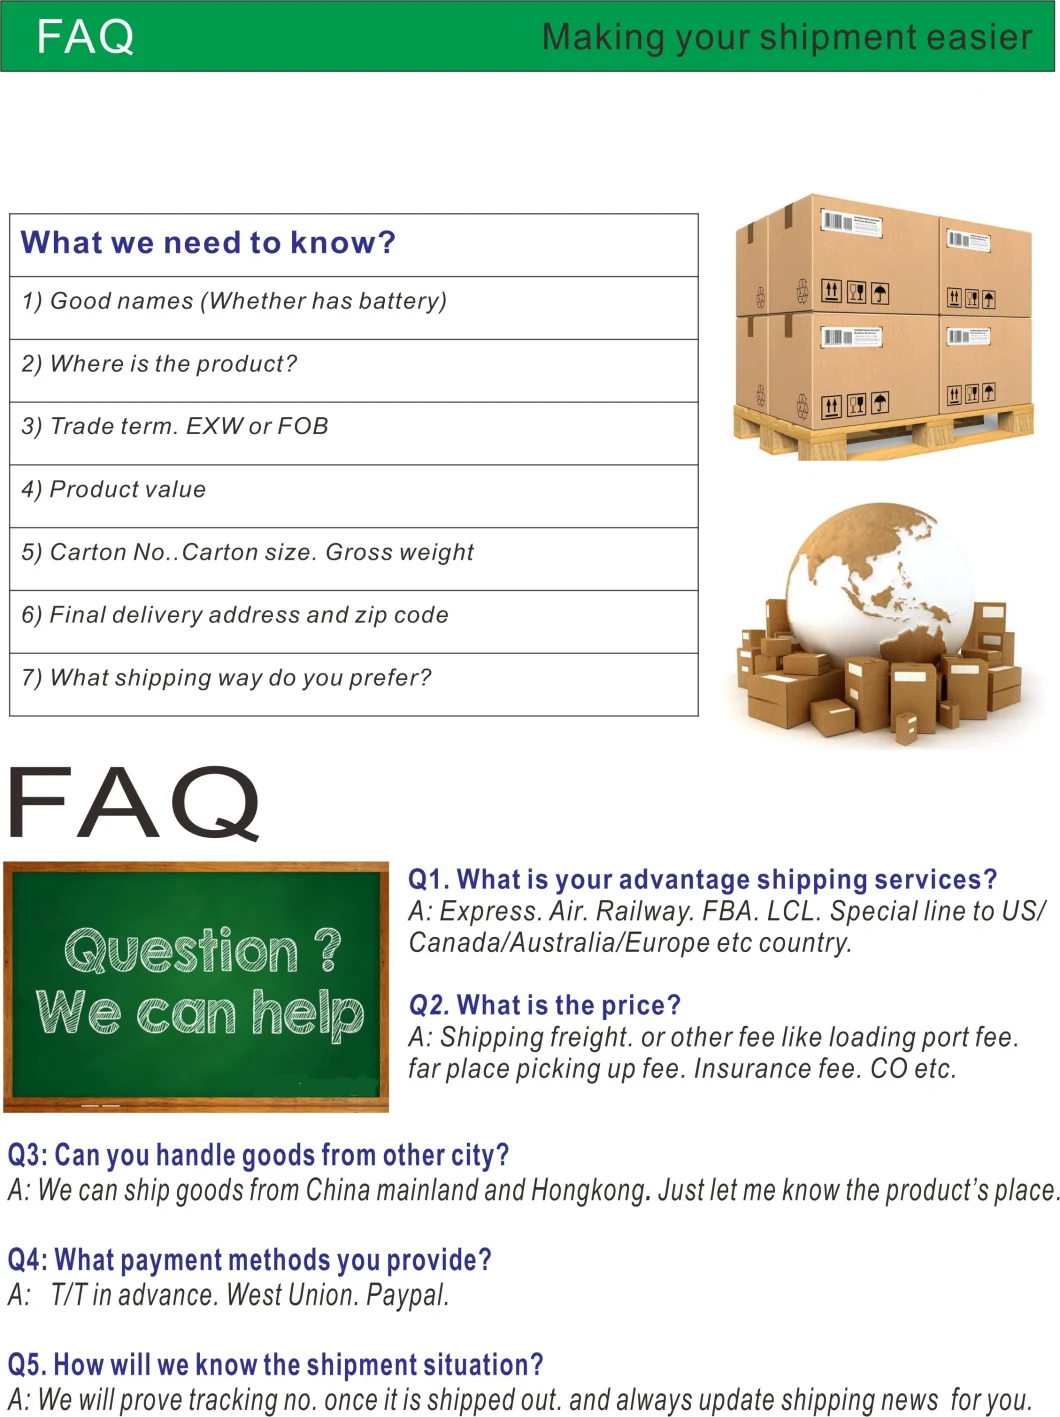 Amazon Fba to Us/Mexico/Canada Shenzhen Air Shipping Agent with Good Service and Rates